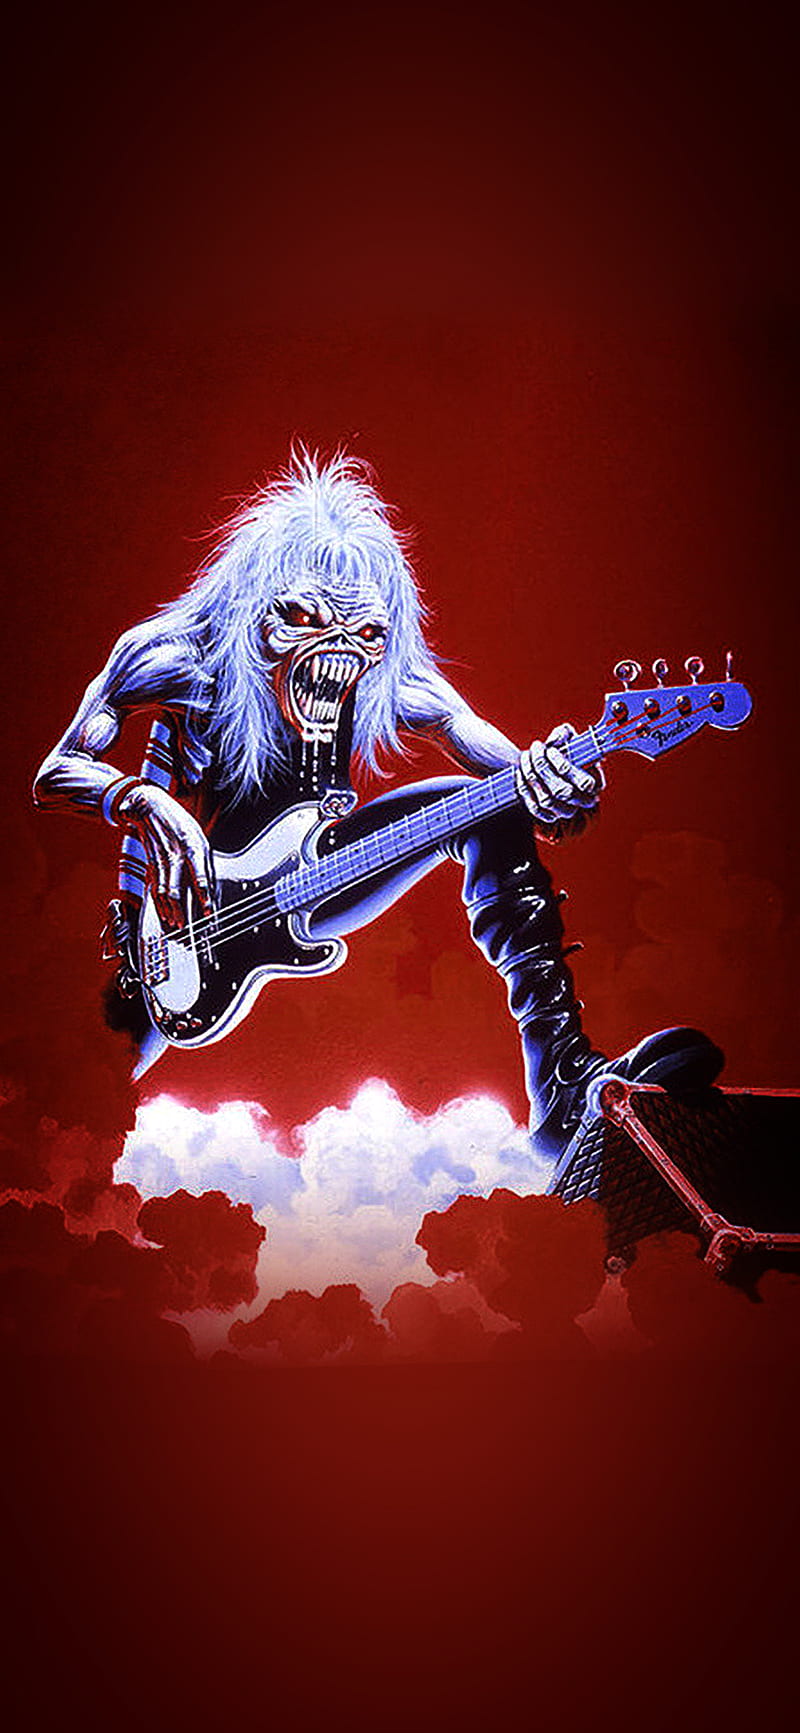 Iron Maiden, cd cover, eddie bass, mobile background, real dead ...